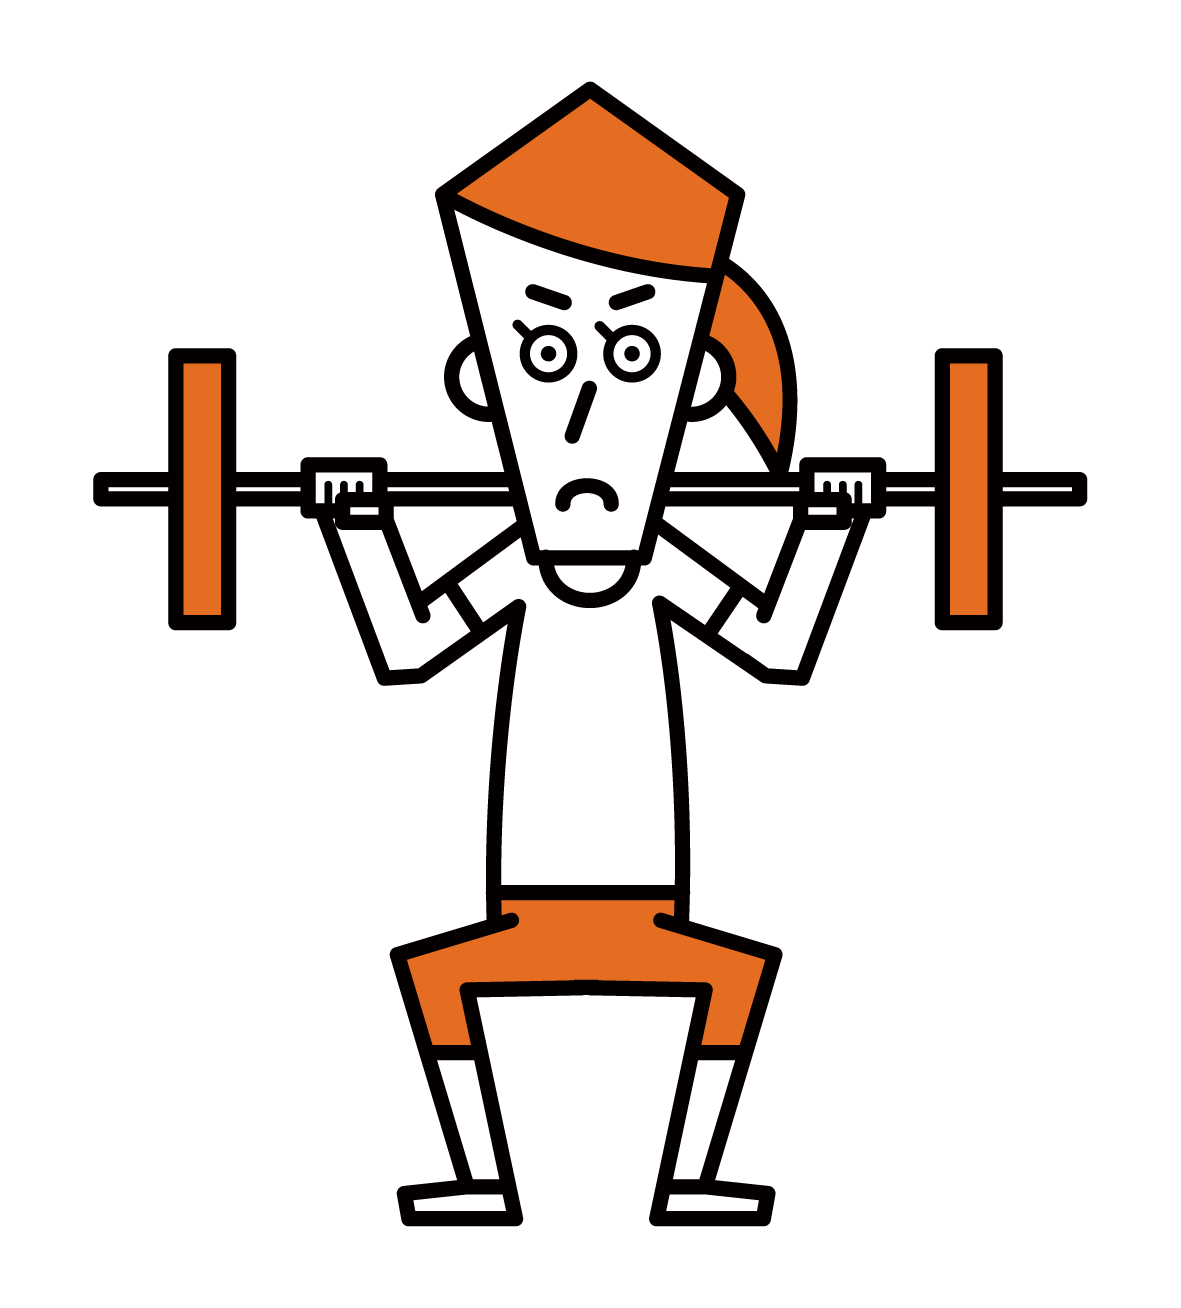 Illustration of a woman doing a barbell squat